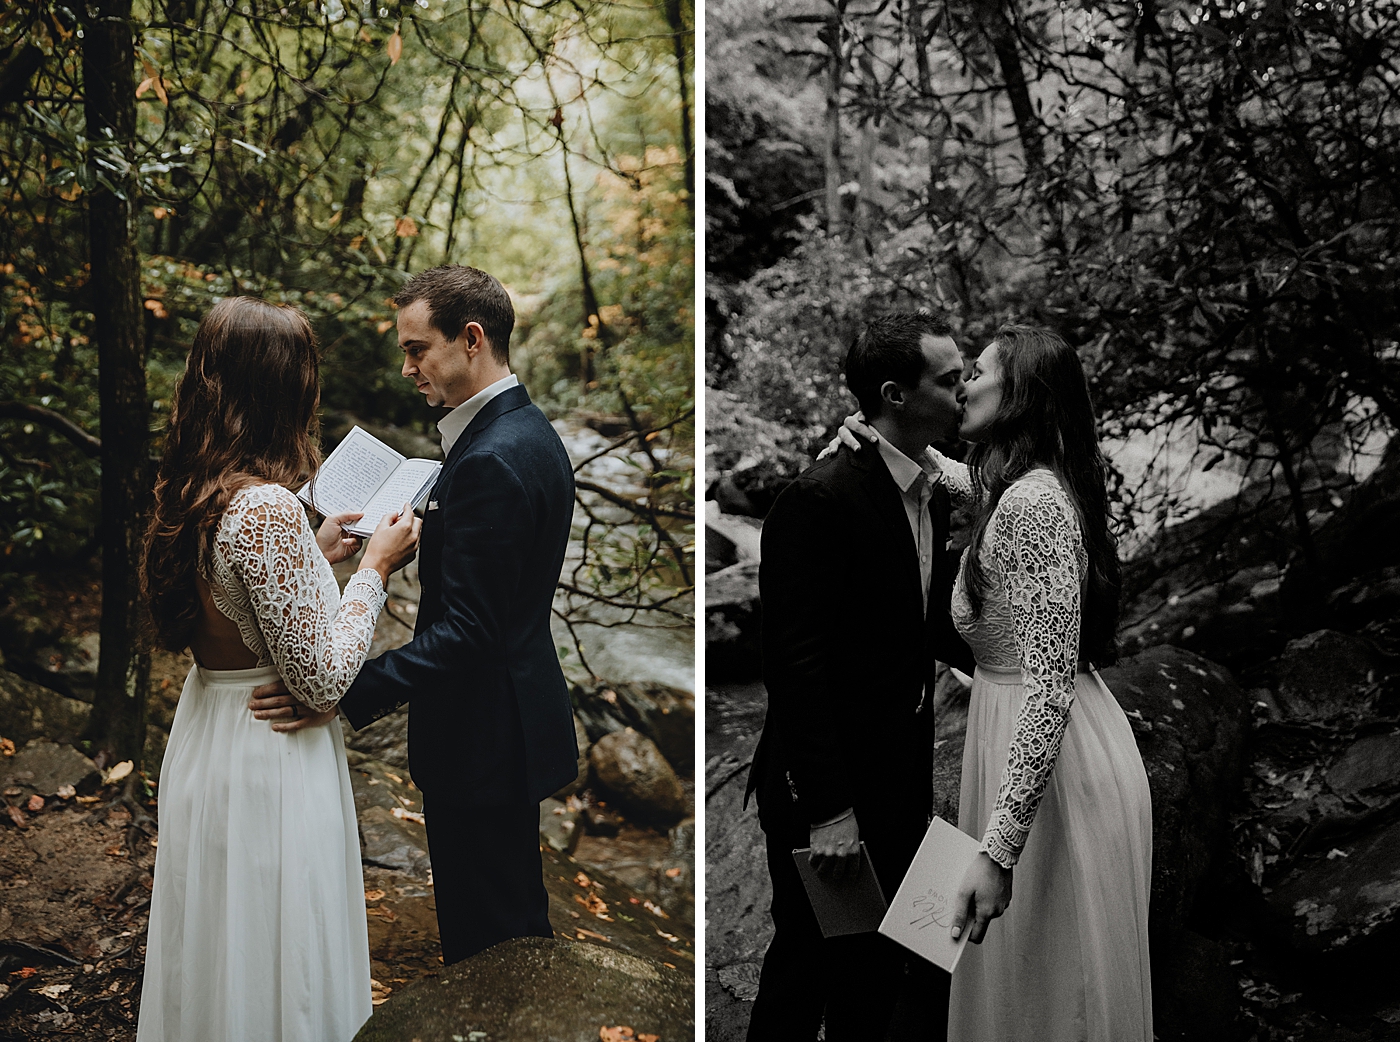 Bride and Groom intimate ceremony in forest Catawba Falls Asheville, NC Elopement Photography captured by Maggie Alvarez Photography